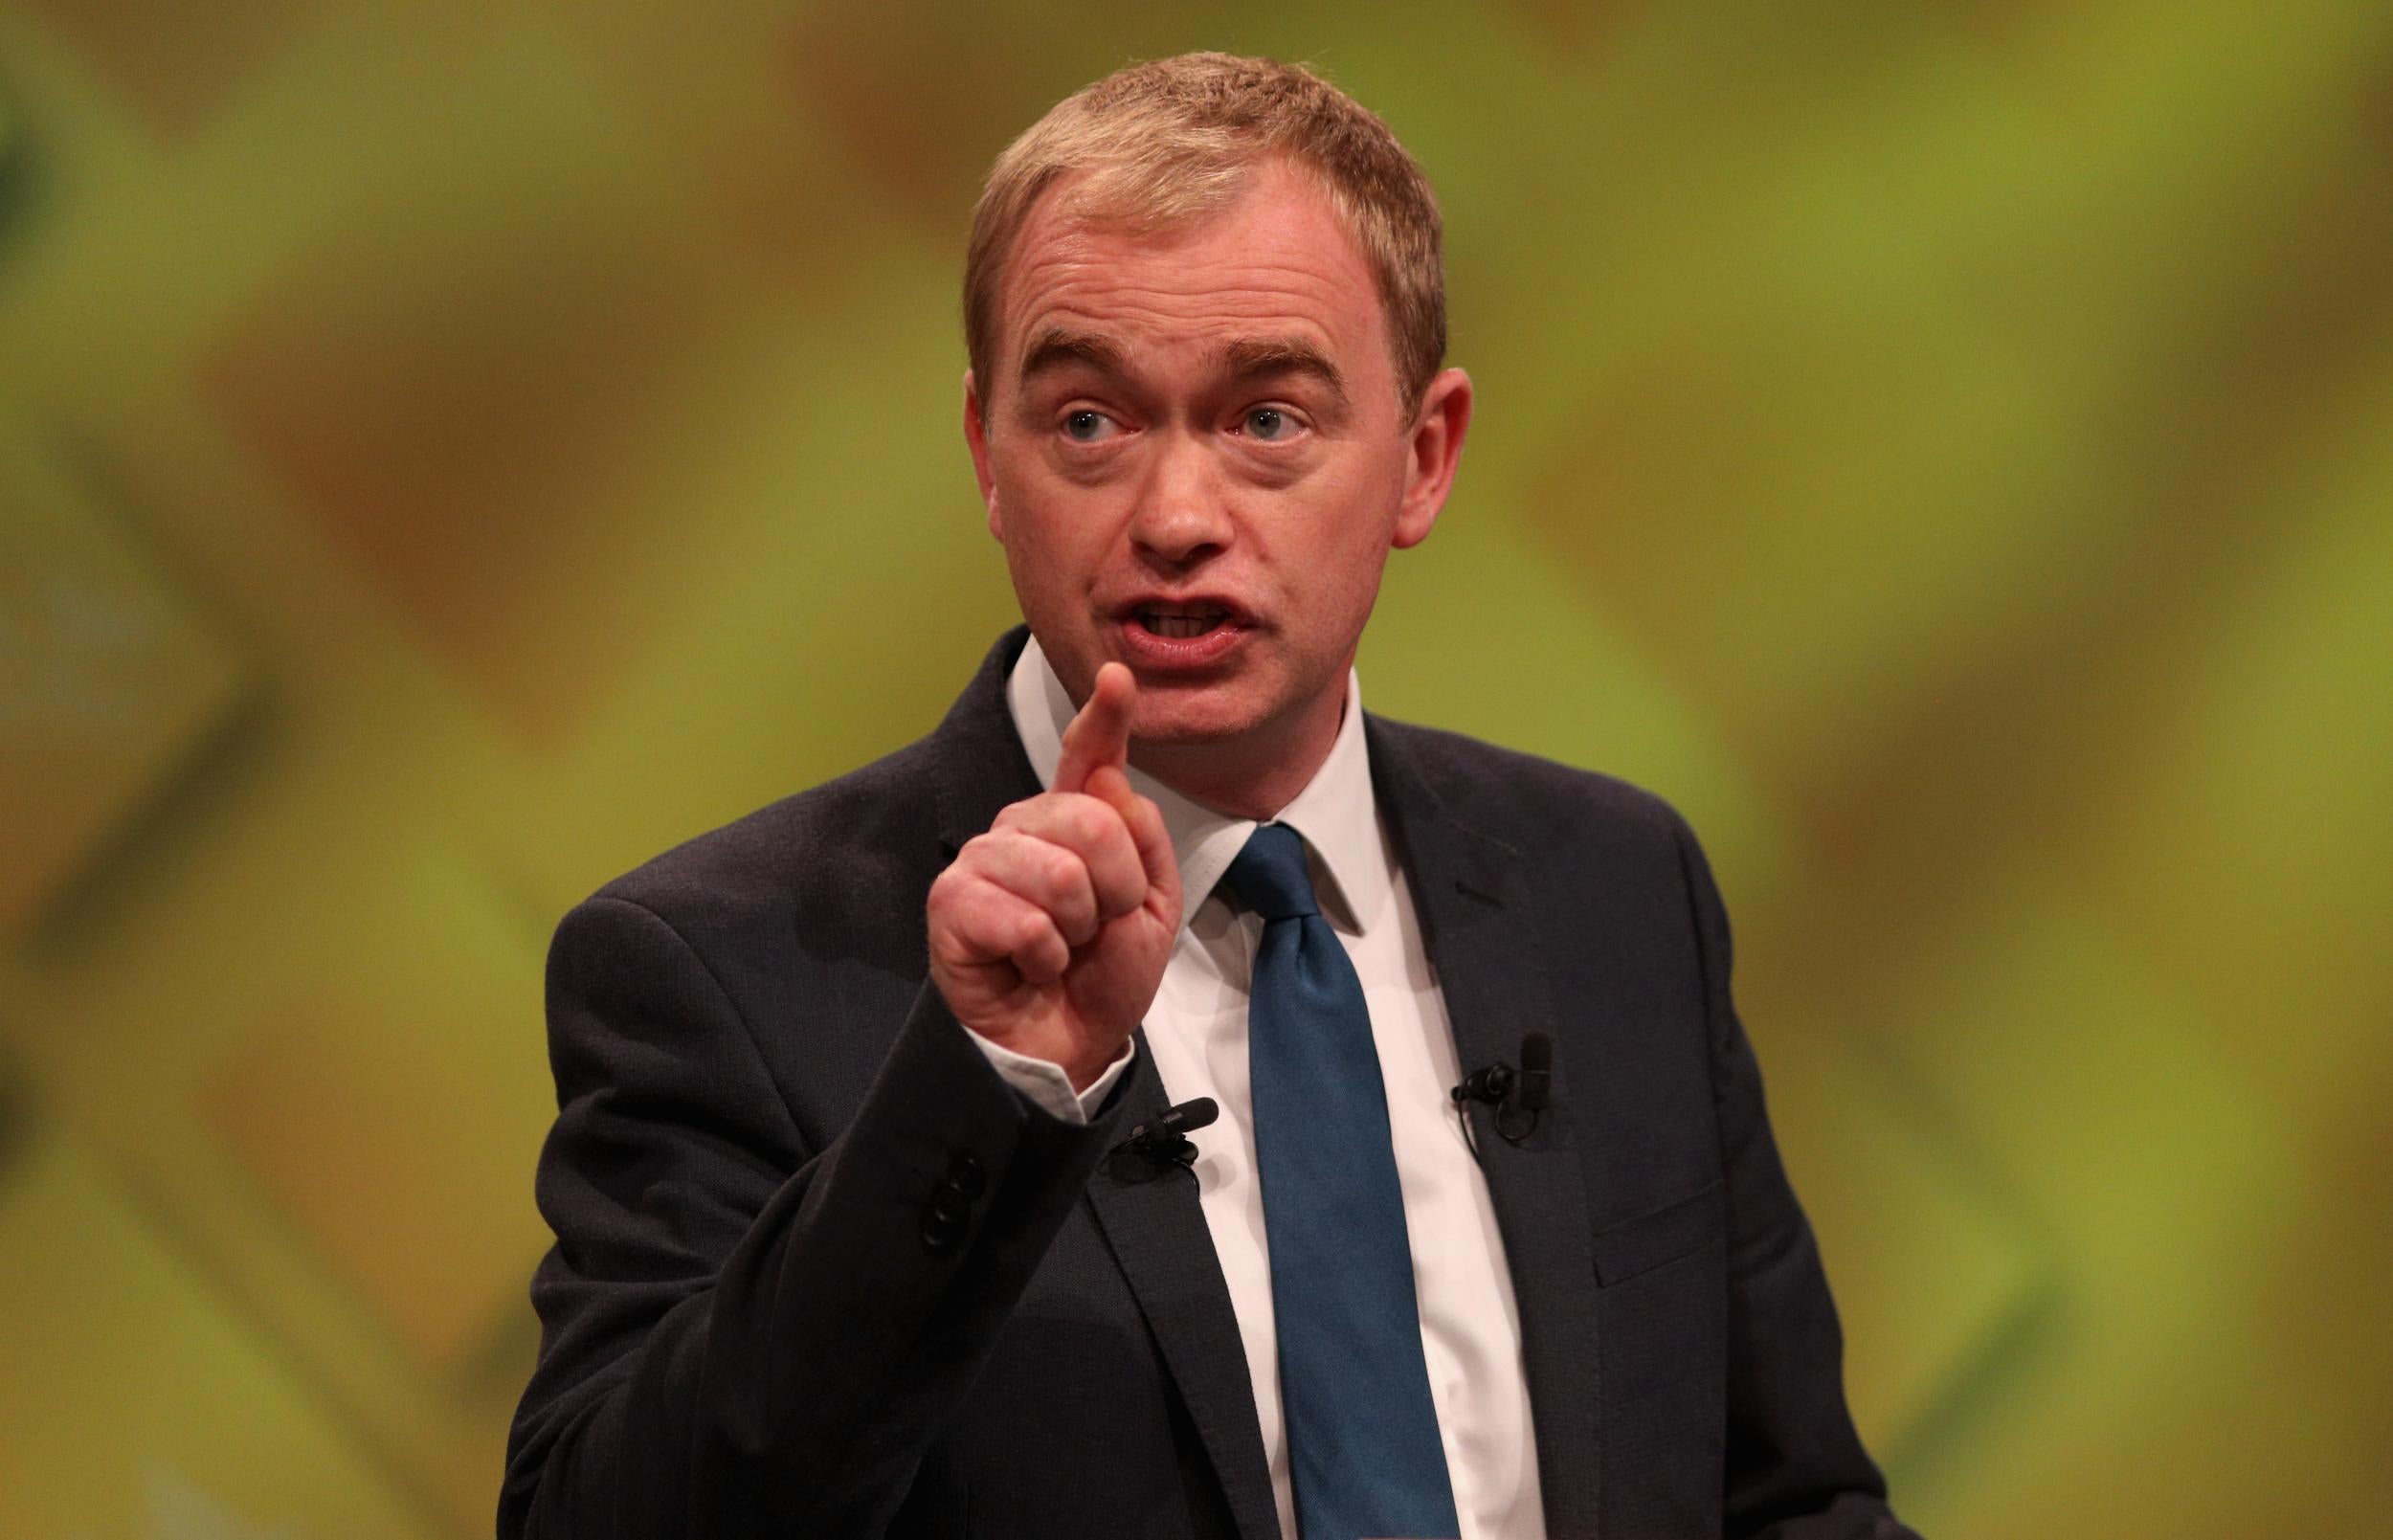 Mr Farron has said unless a referendum is called his party will vote against the Government on the triggering of Article 50